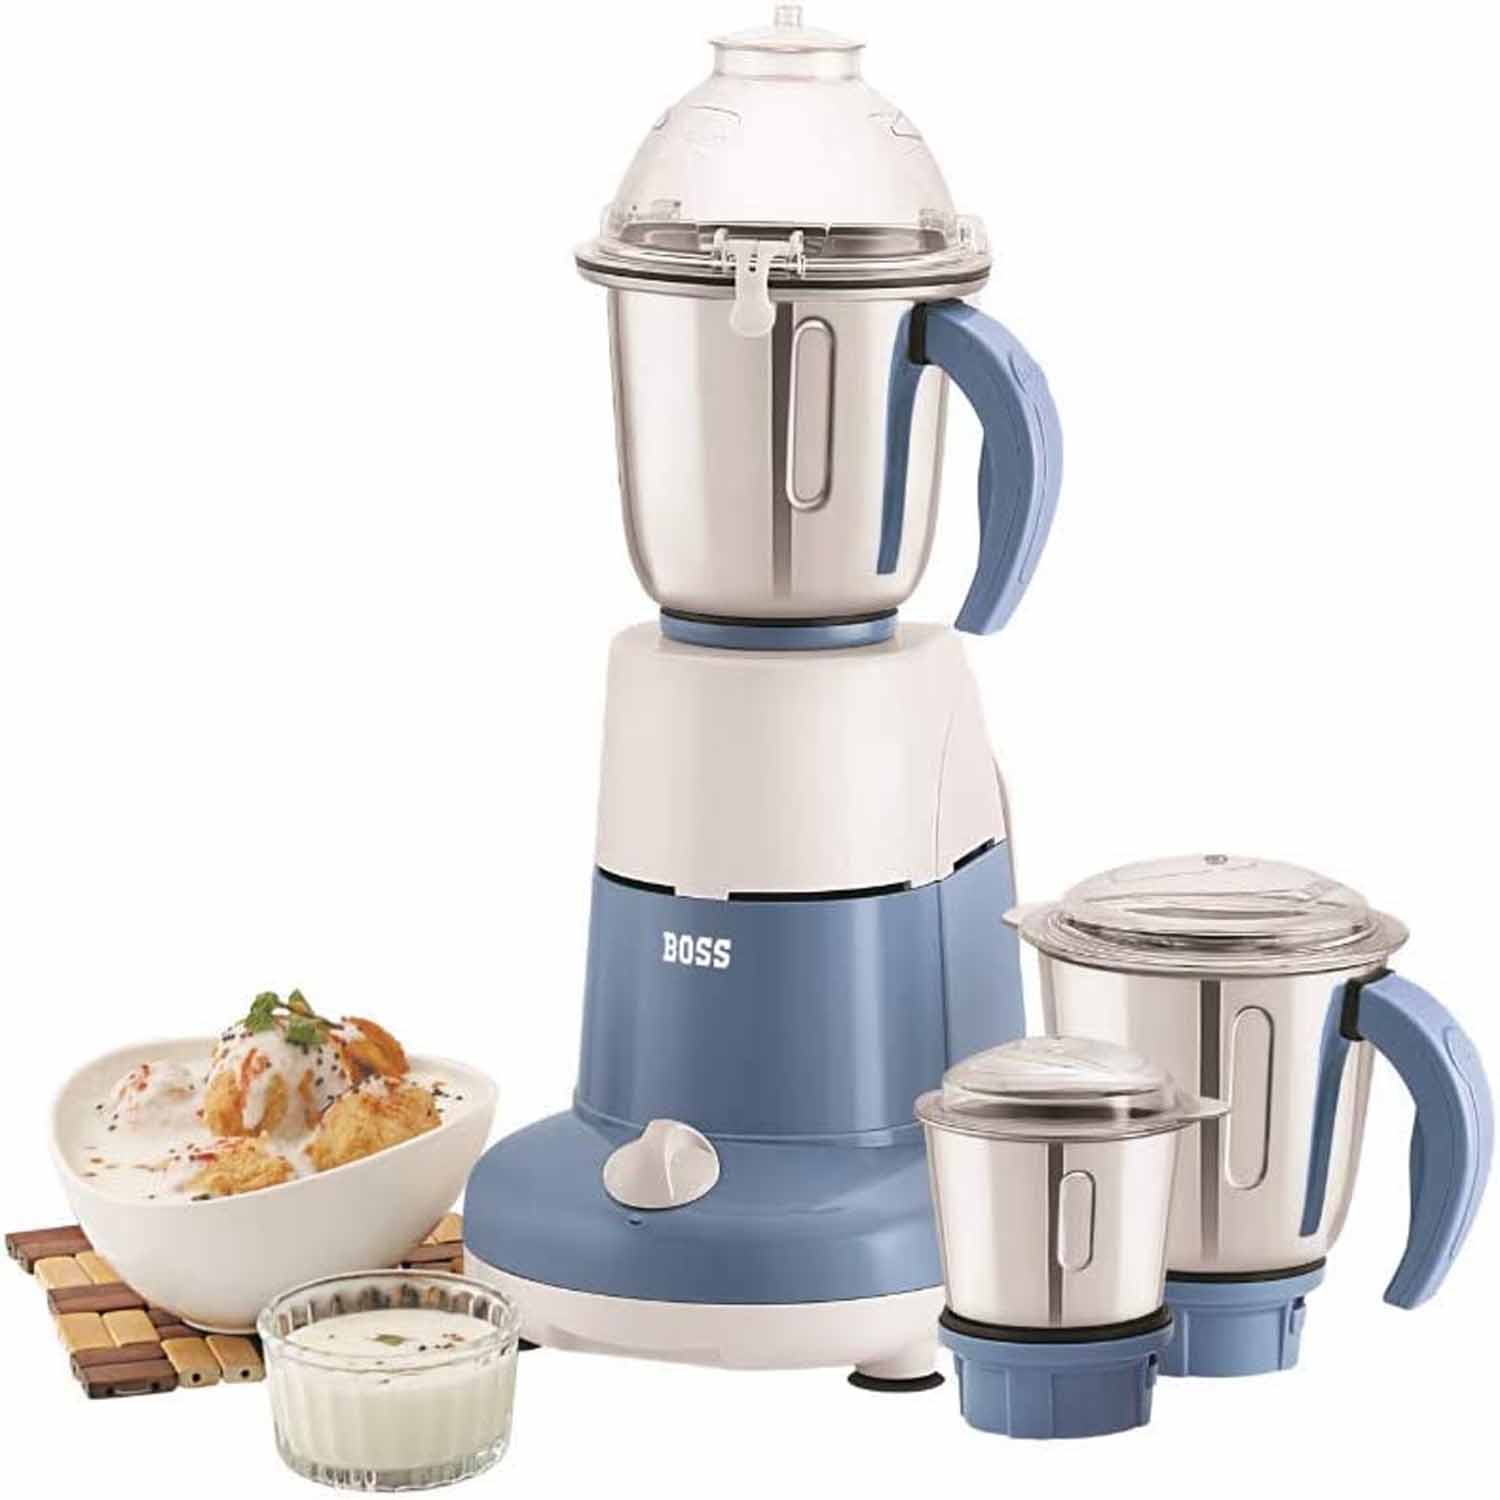 BOSS 110V Powerful 750W Mixer Grinder w/ 3 Stainless Steel Jars & Blades Perfect for Dry & Wet Fine Grinding